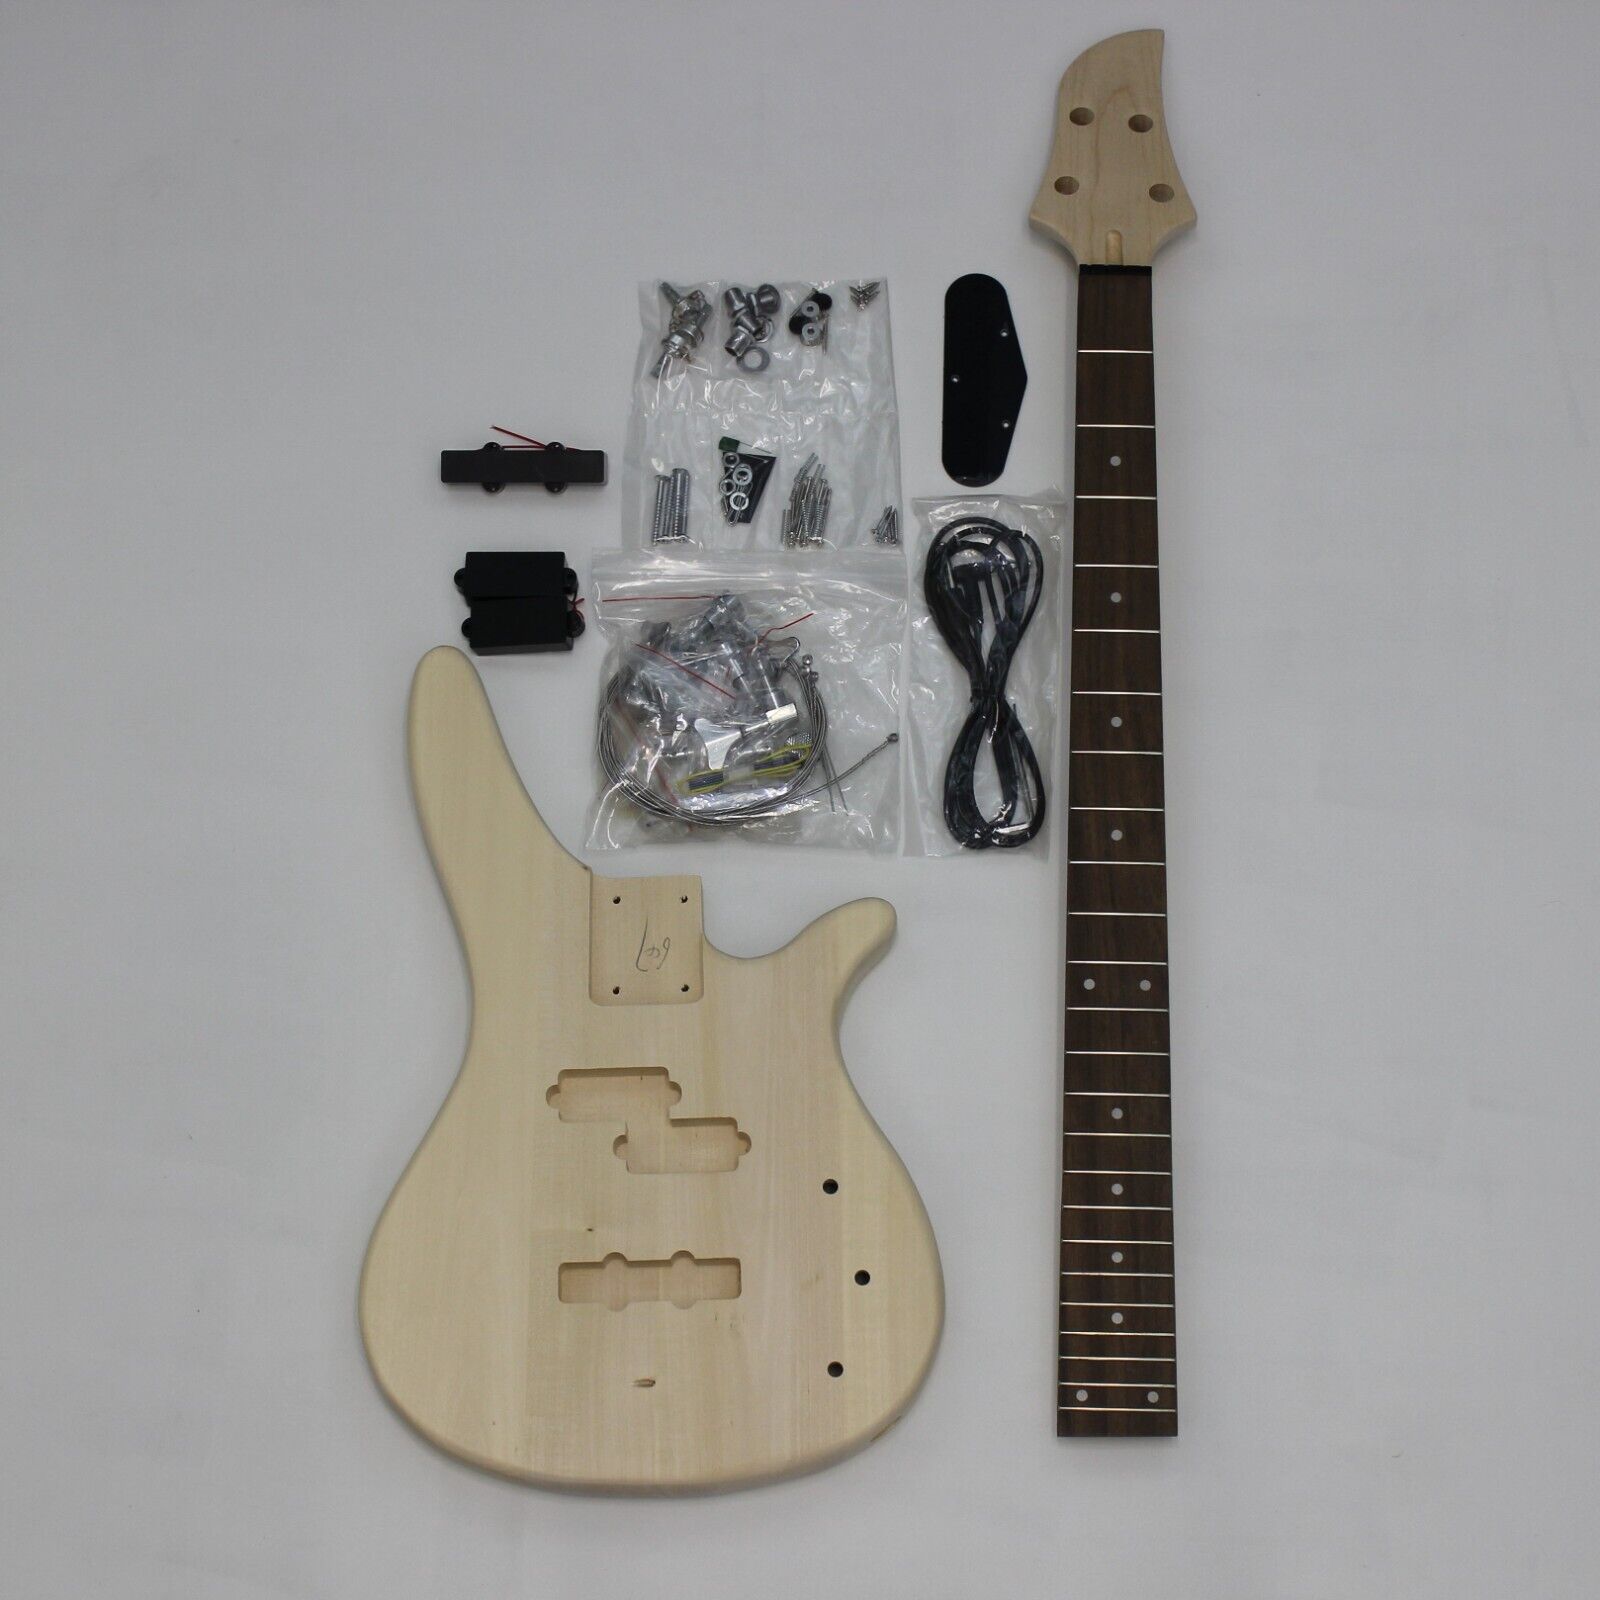 Liquidating a closed business - DIY Electric Bass Guitar Kit - Brand new in box.